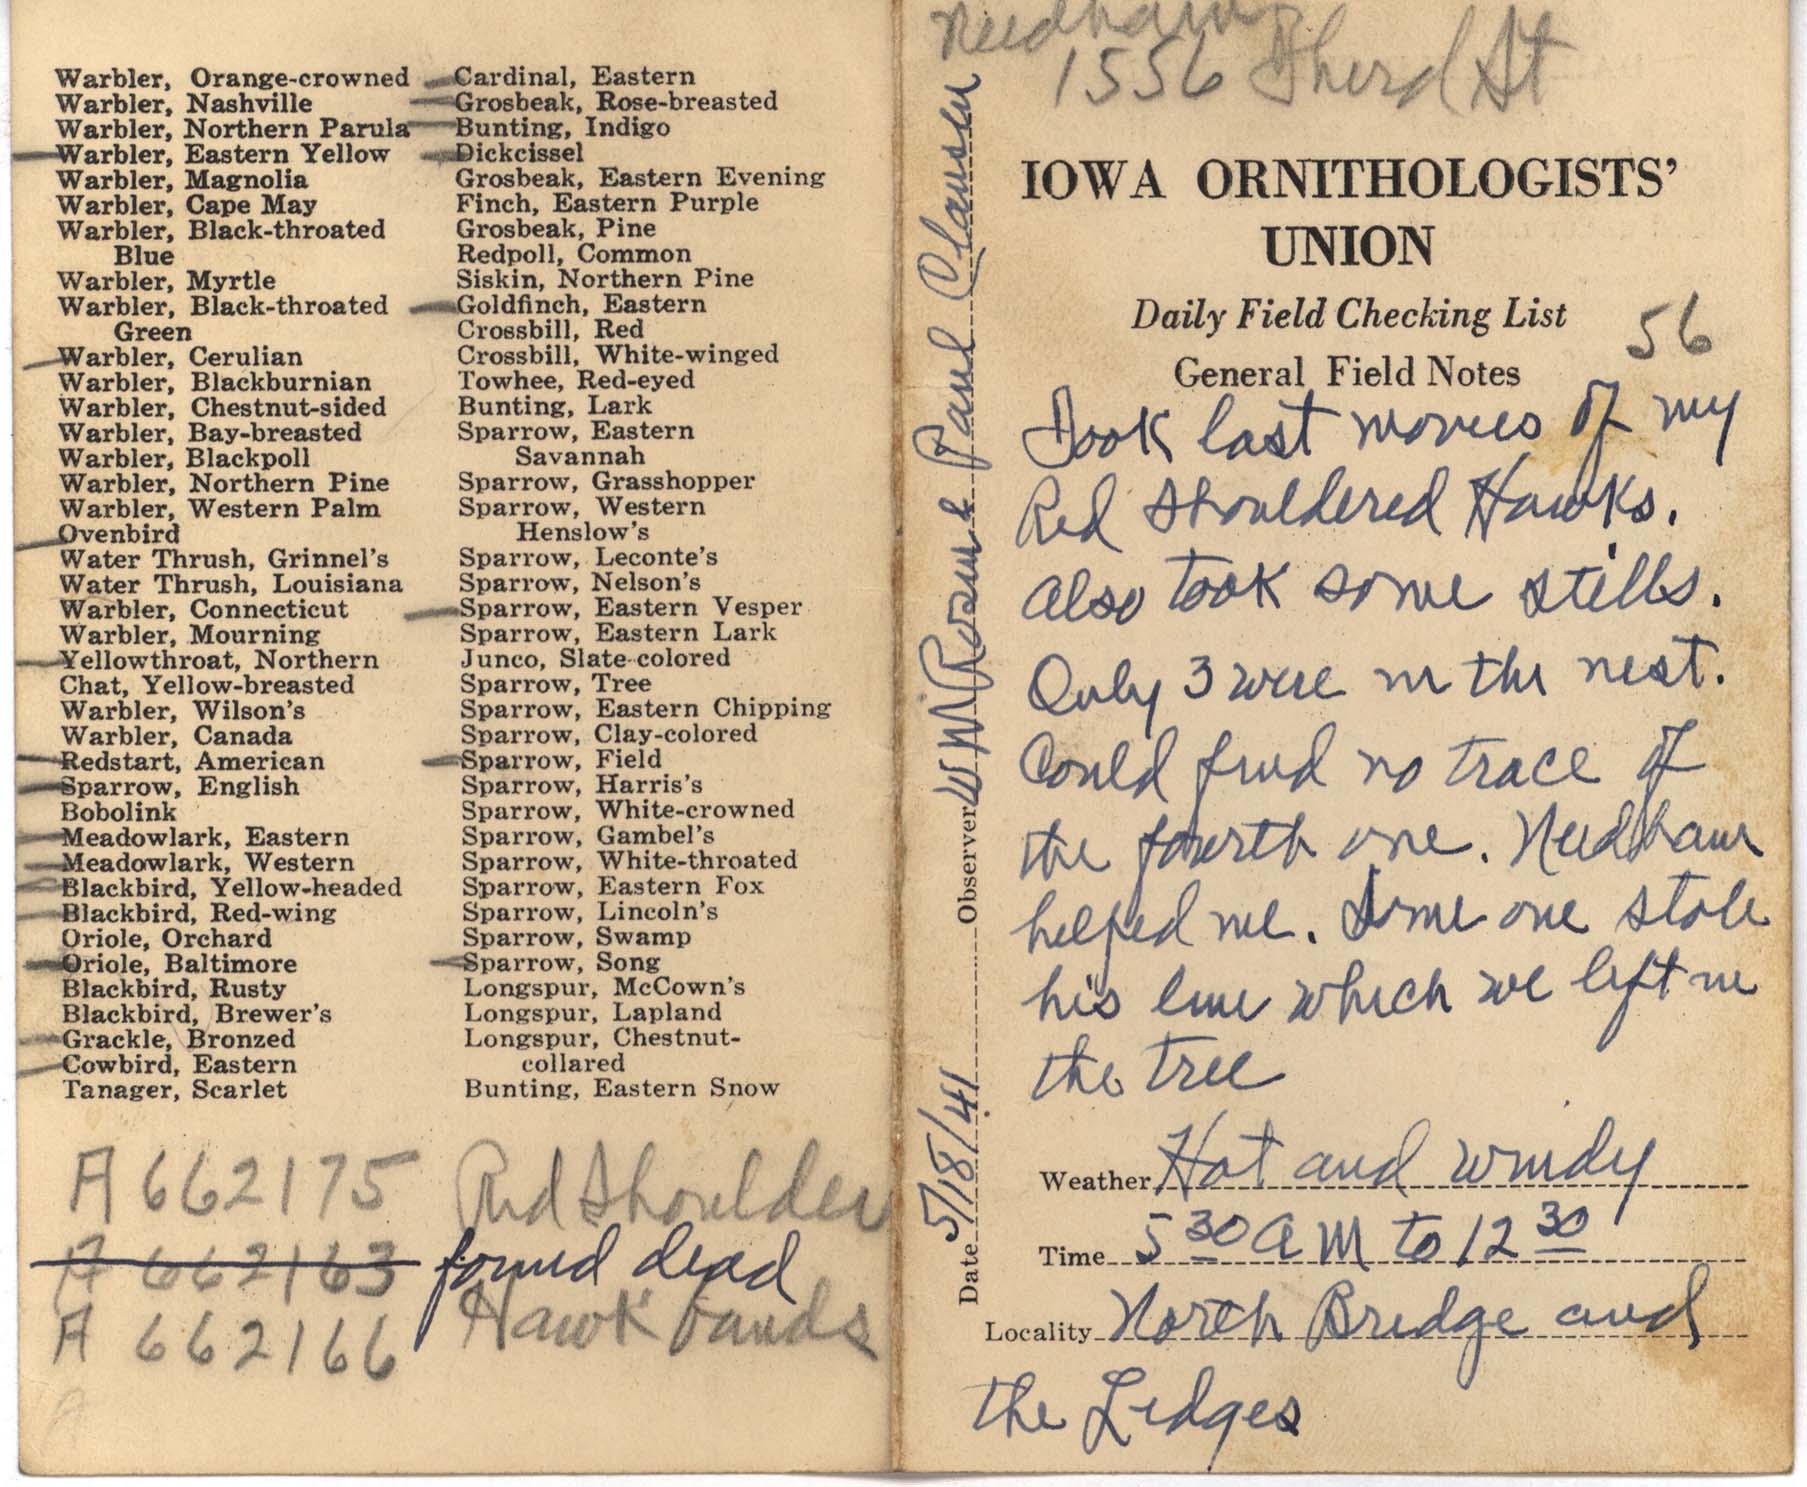 Daily field checking list by Walter Rosene, May 18, 1941